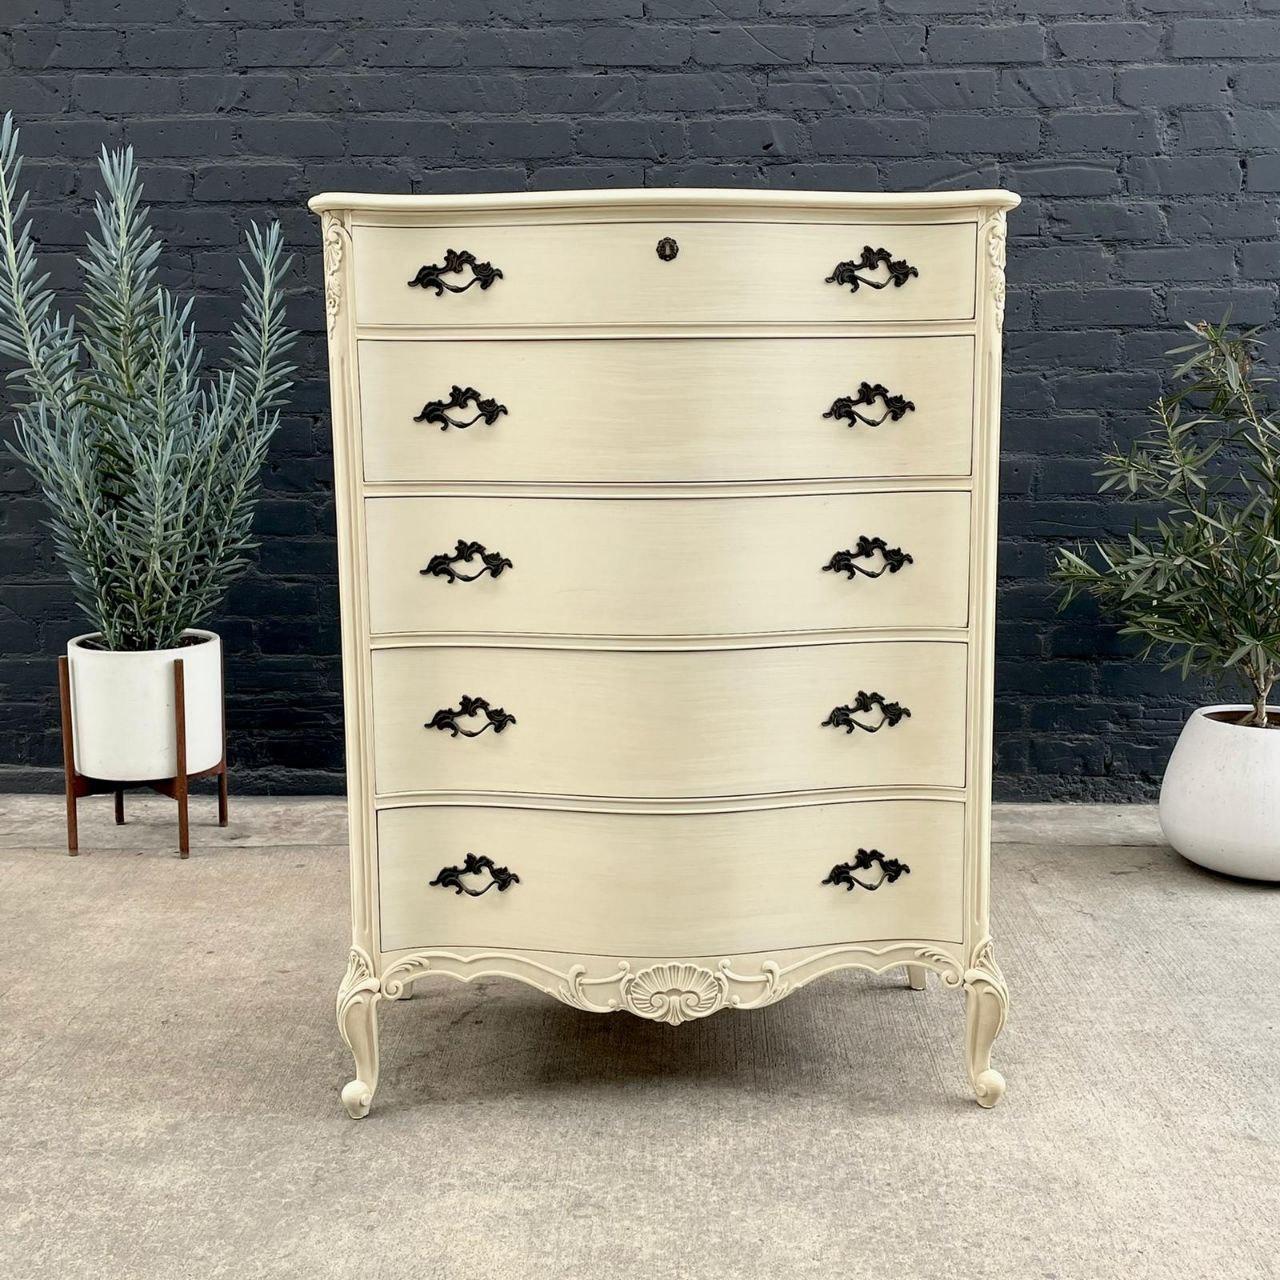 With over 15 years of experience, our workshop has followed a careful process of restoration, showcasing our passion and creativity for vintage designs that can seamlessly be incorporated with many interior decors. Enjoy! :)

Dimensions: 51.25” H x